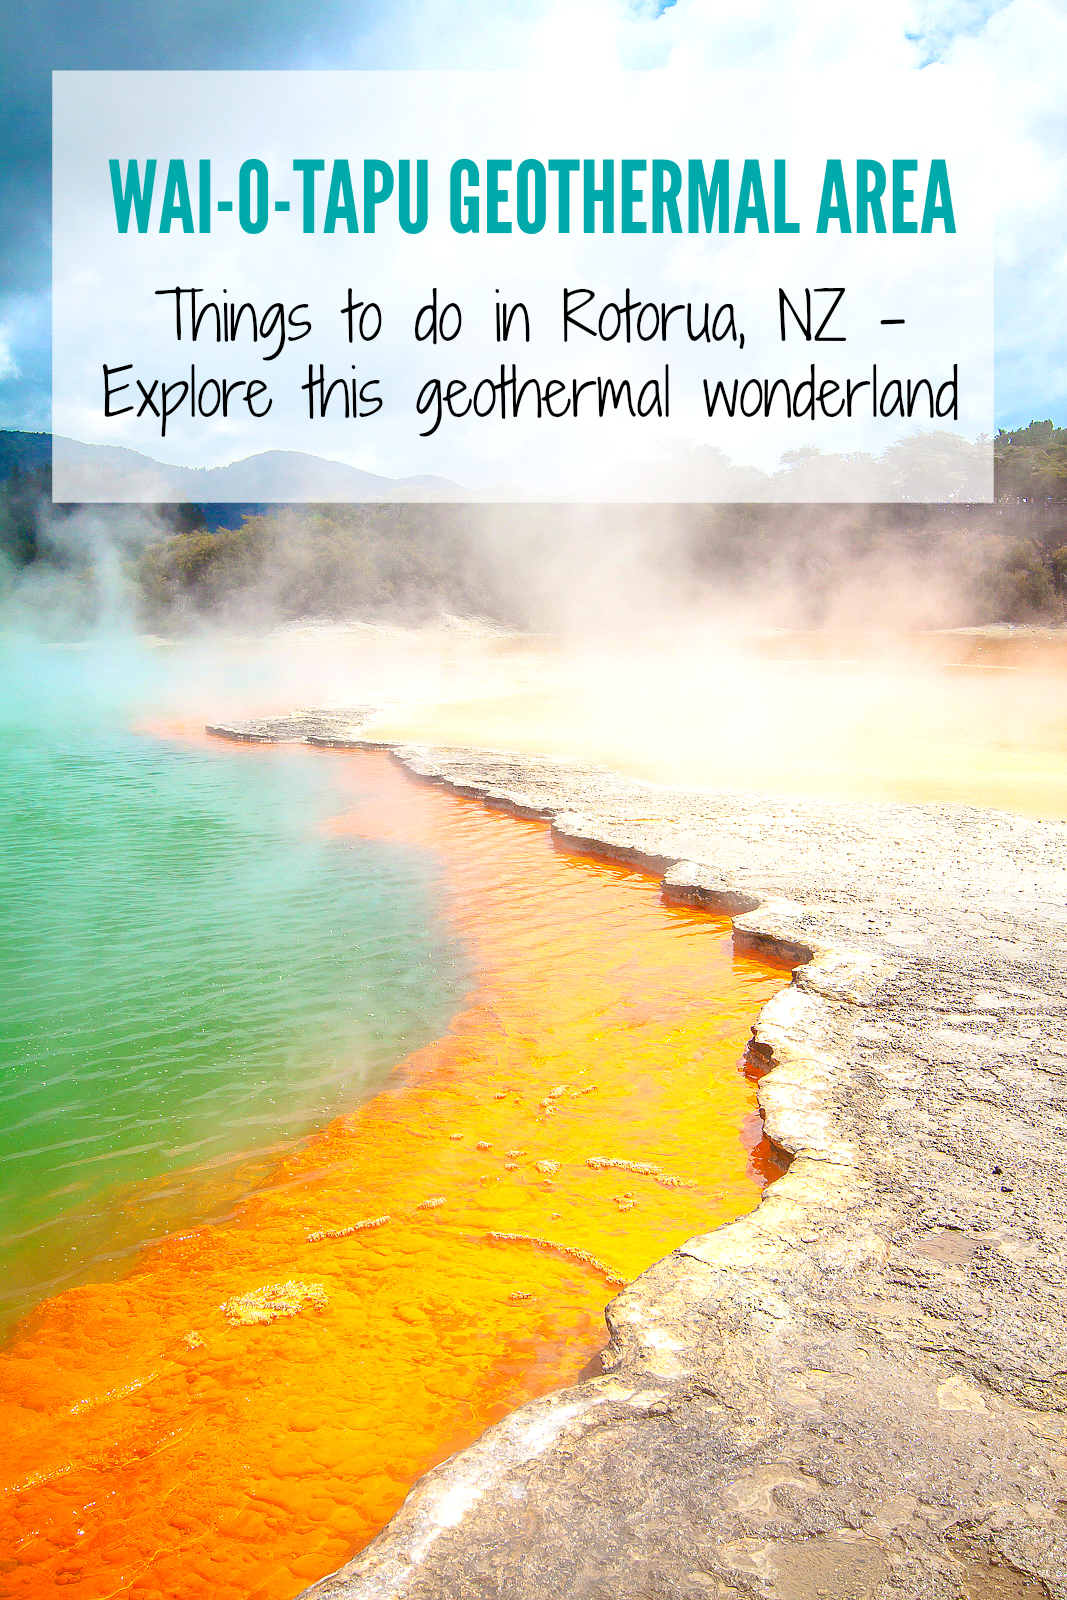 Things to Do in Rotorua: The area has lots of geothermal activity but Wai-O-Tapu is a must see for New Zealand’s most colorful area! | www.eatworktravel.com - The luxury, adventure travel couple!